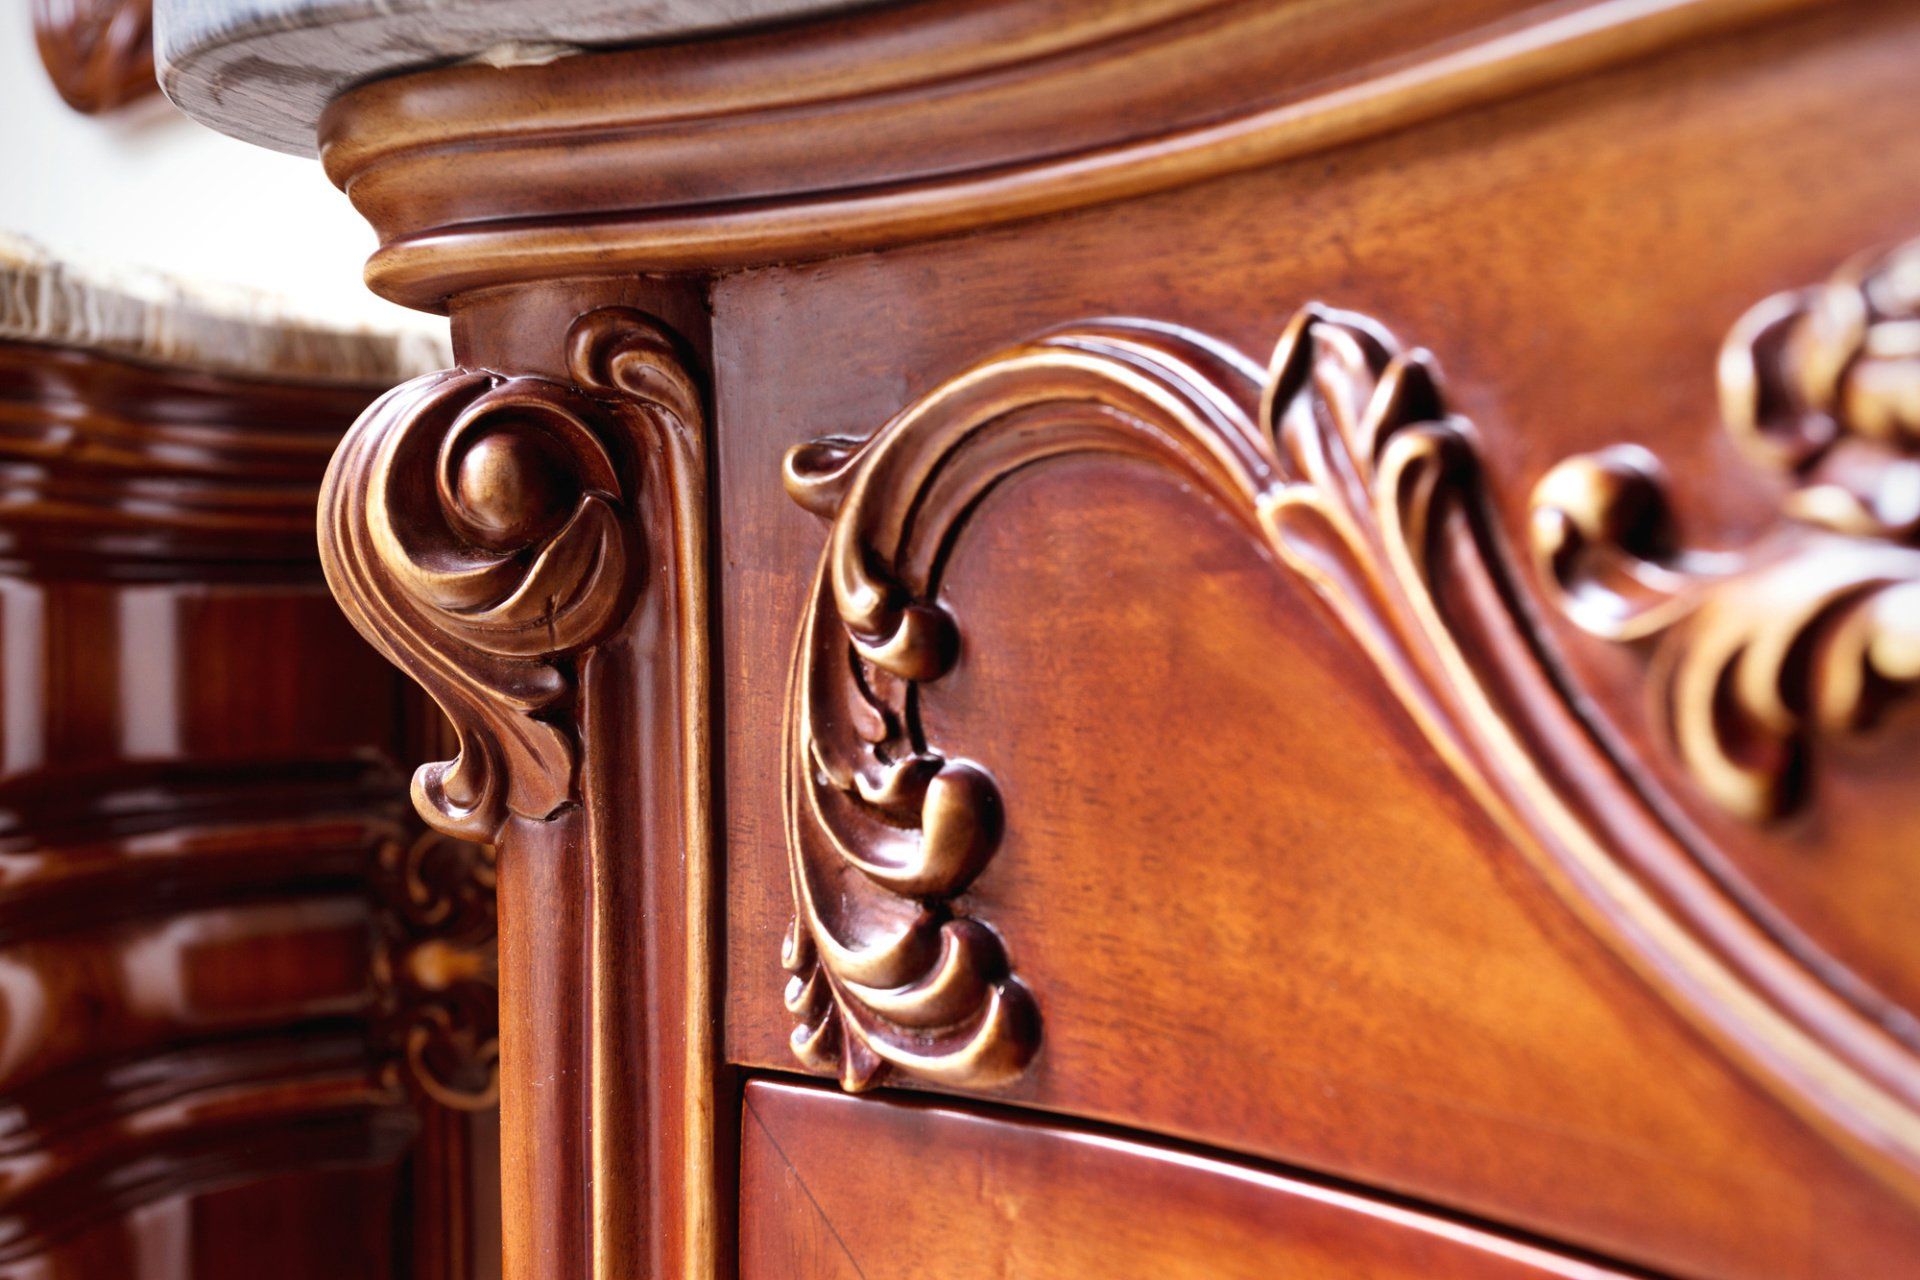 Caring for Wooden Furniture